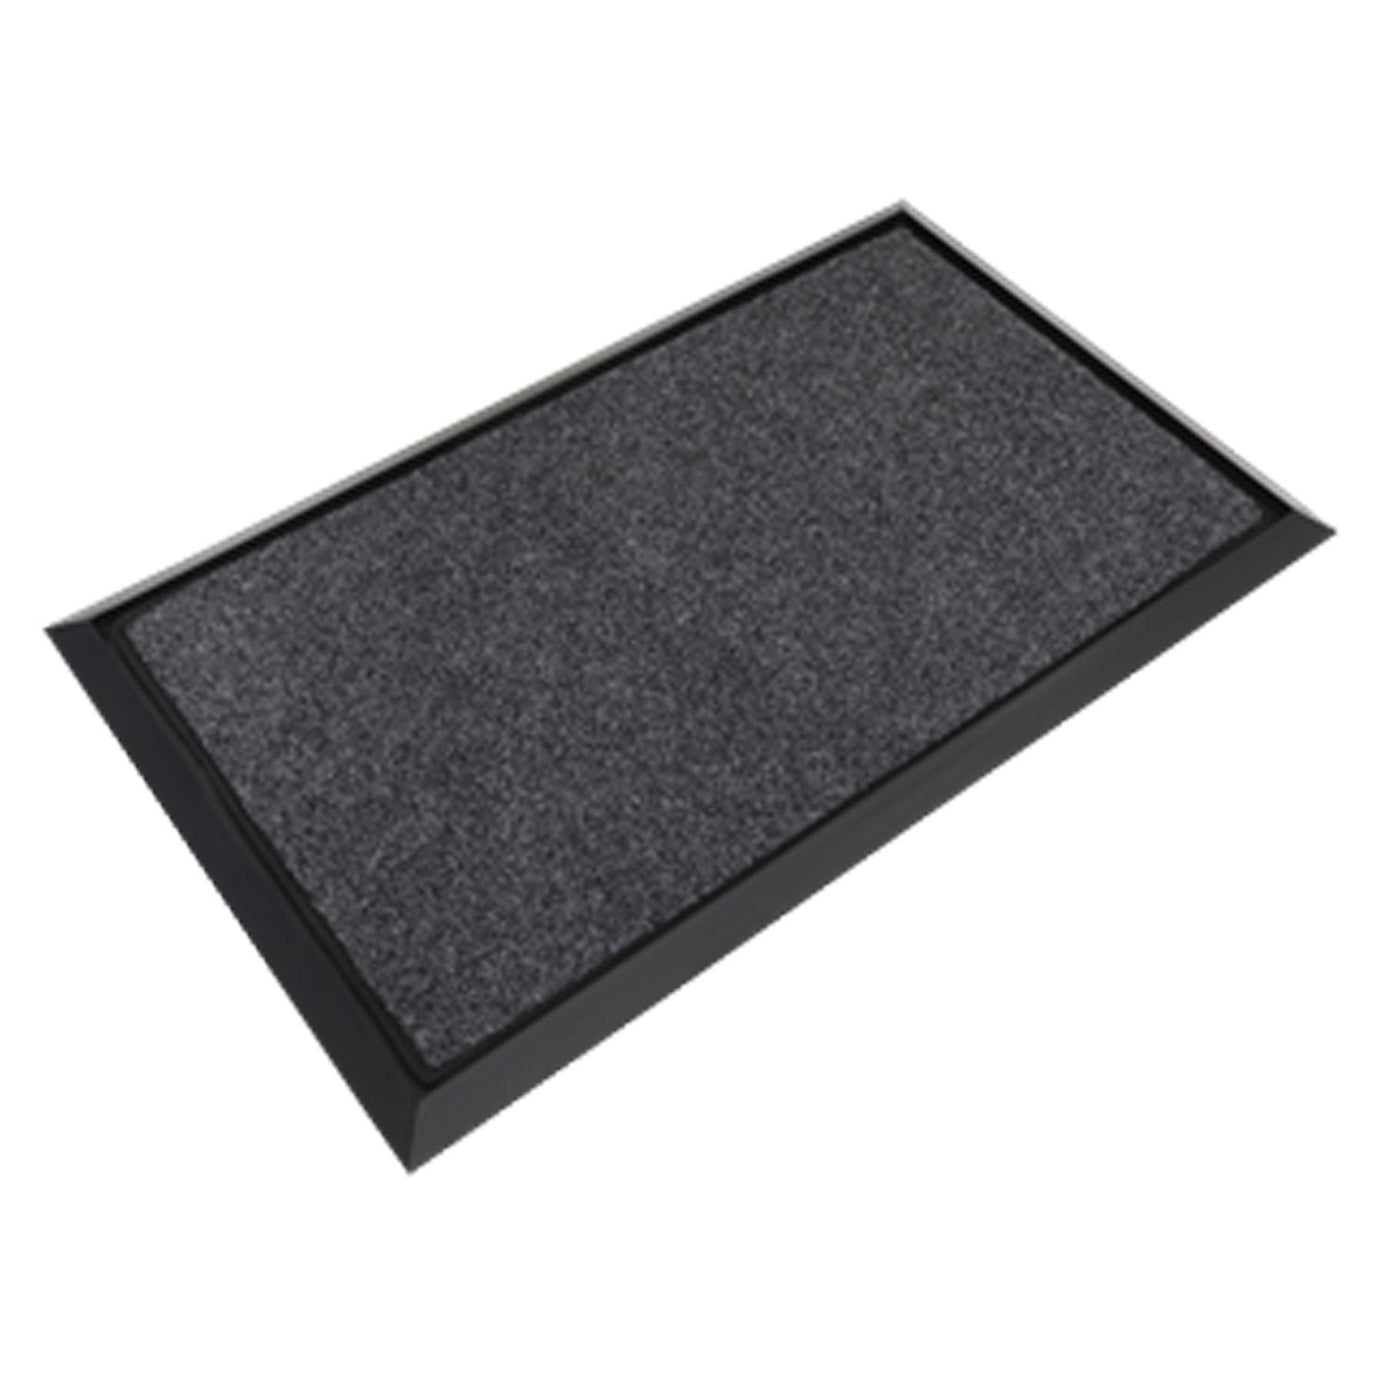 Sealey Rubber Disinfection Mat With Removable Carpet 450 x 750mm